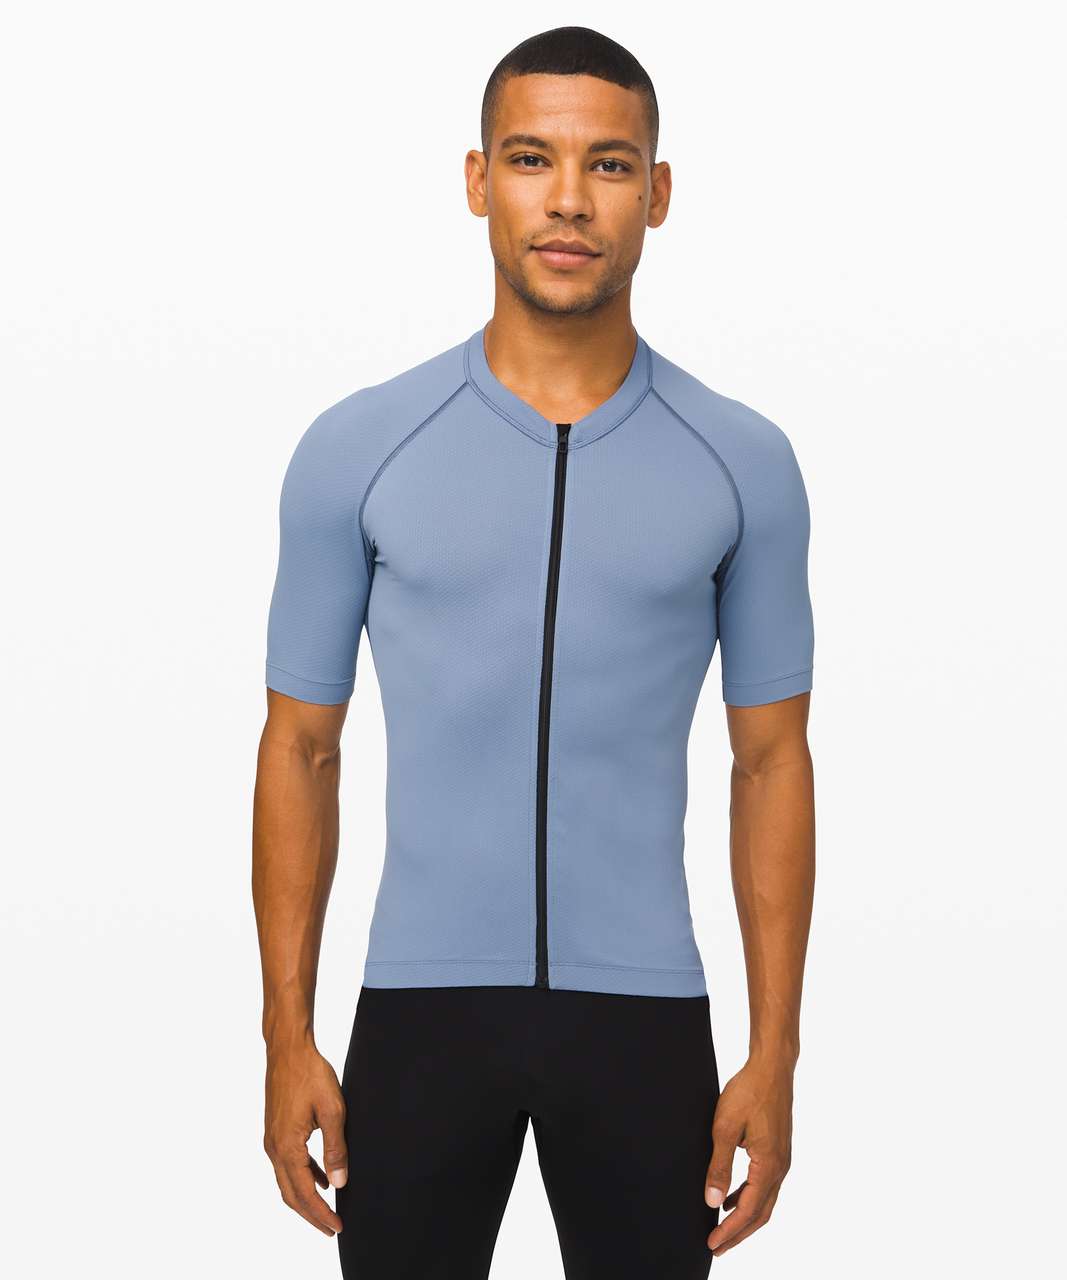 Lululemon City To Summit Cycling Jersey - Tempest Blue